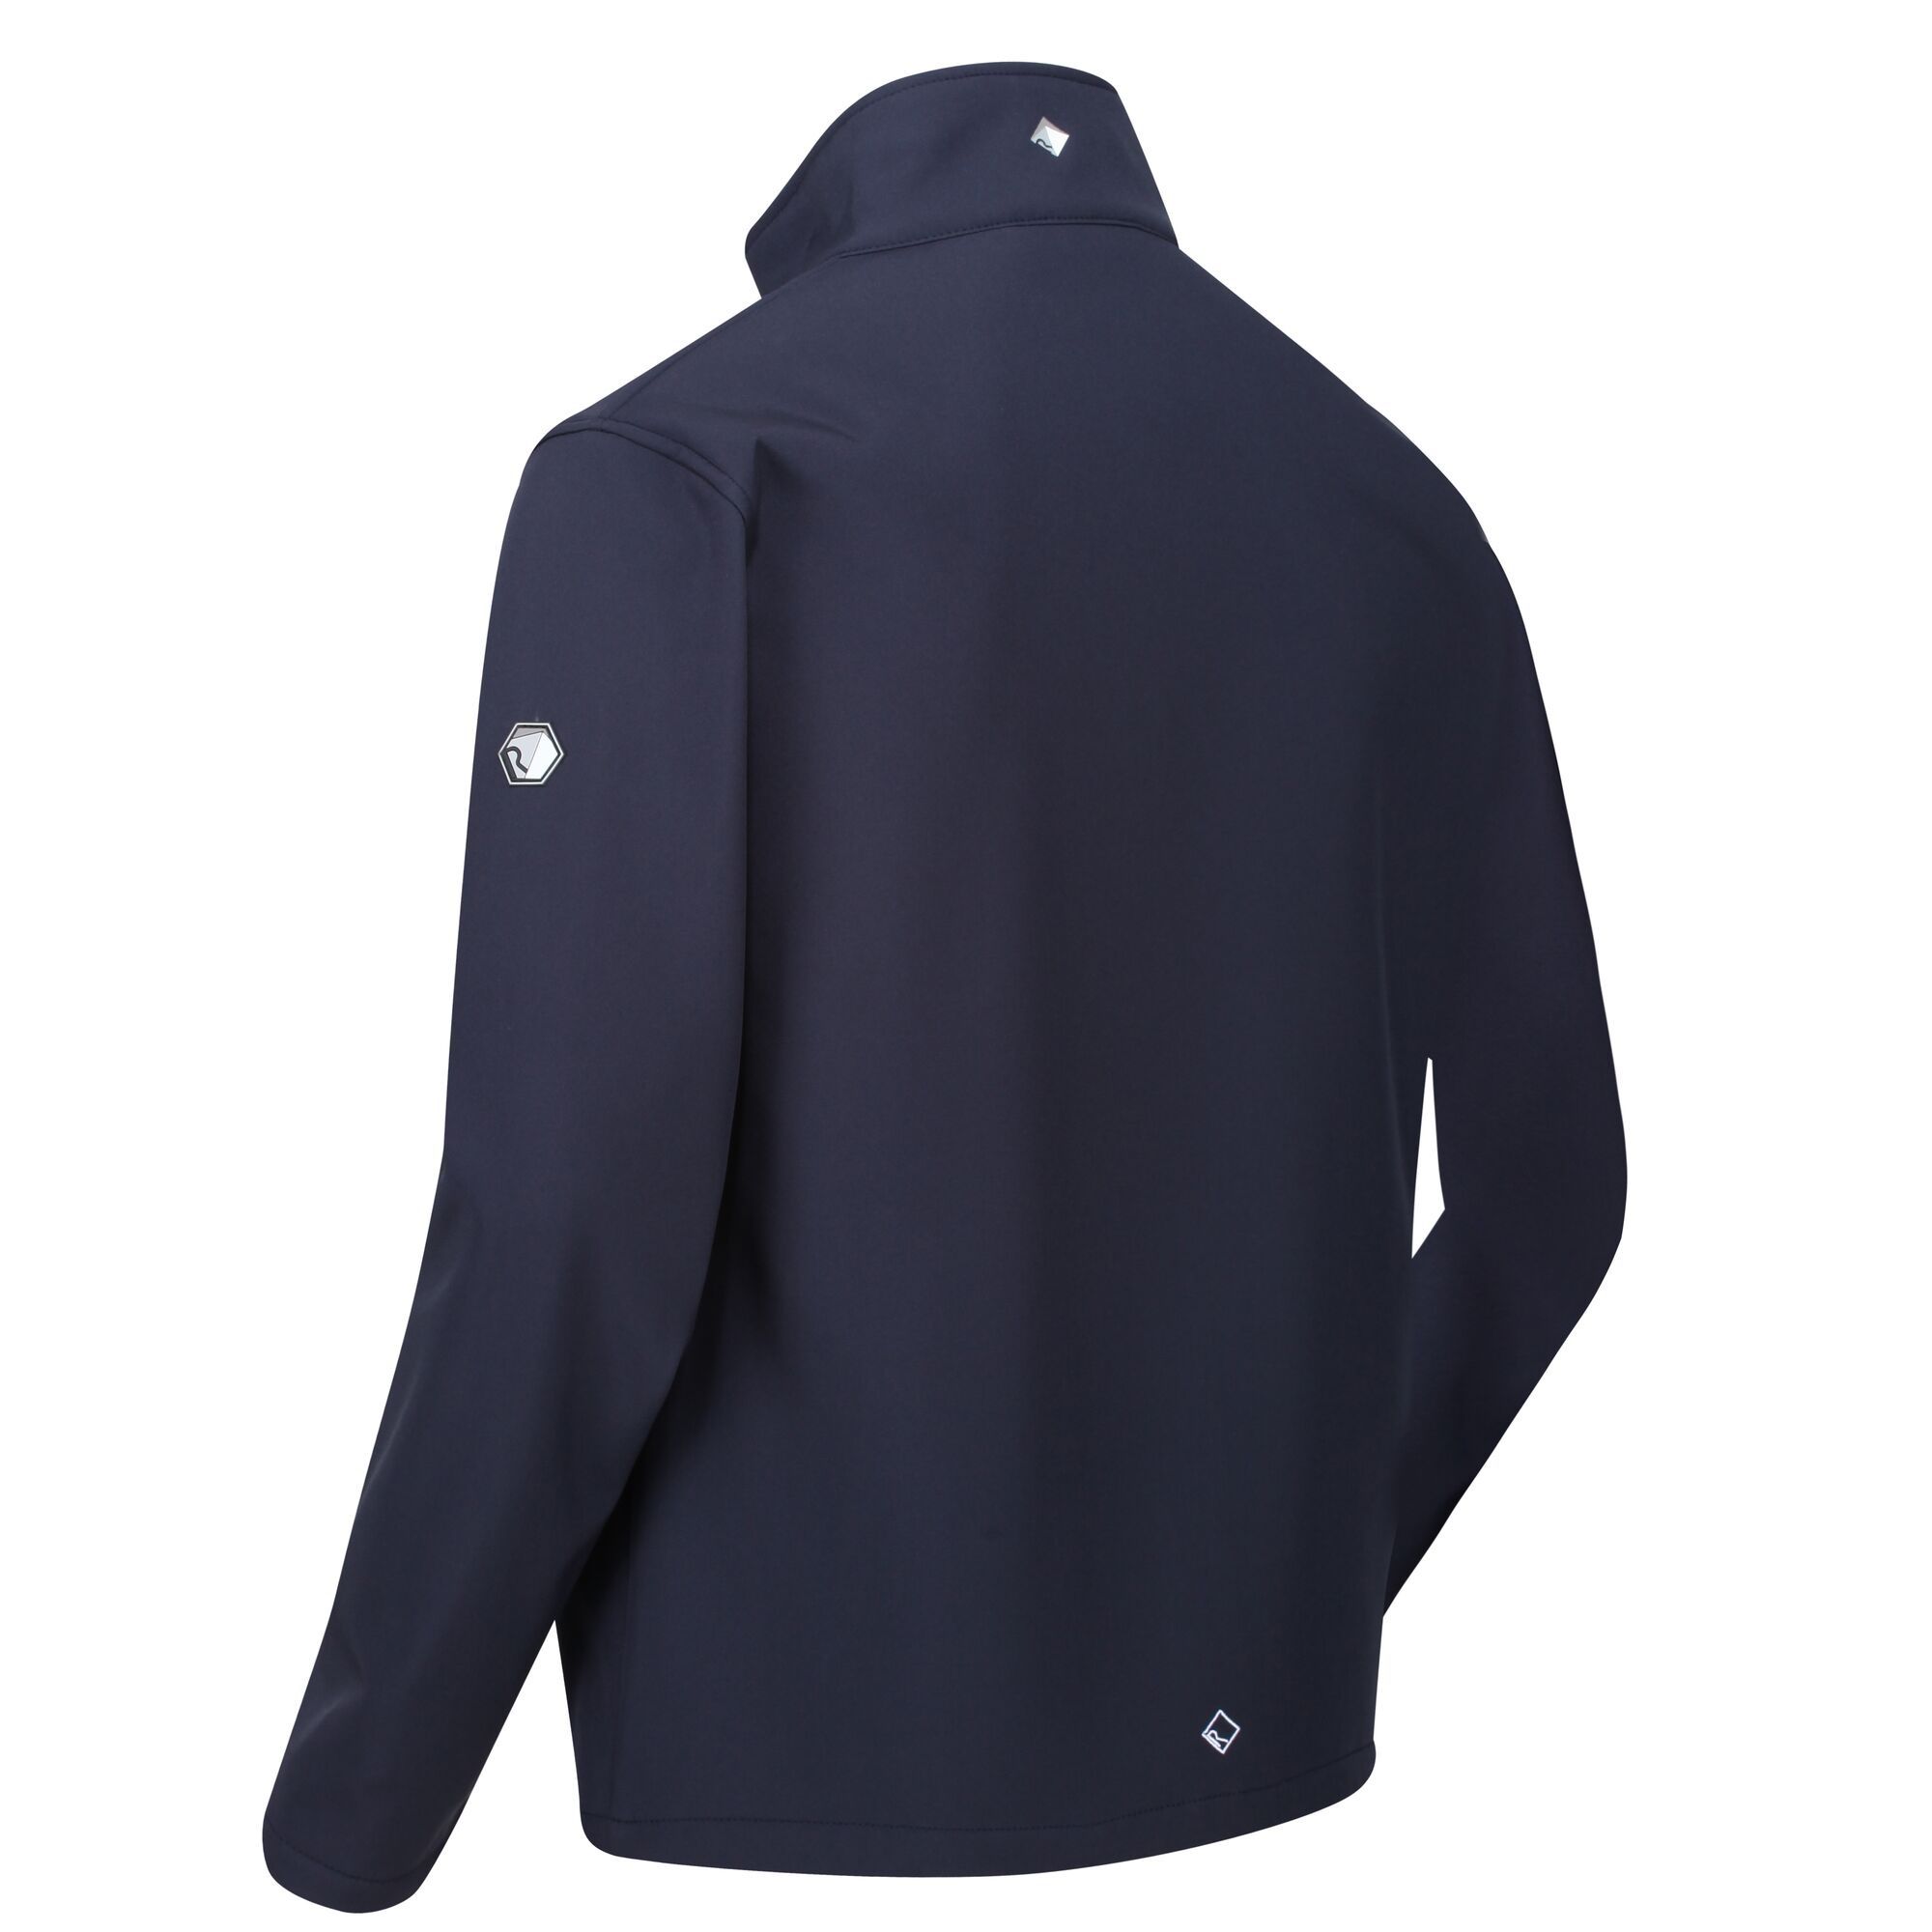 Material: 96% polyester & 4% elastane. Warm backed woven stretch softshell fabric. Durable water repellent finish. Wind resistant. 2 zipped lower pockets. Adjustable shockcord hem.